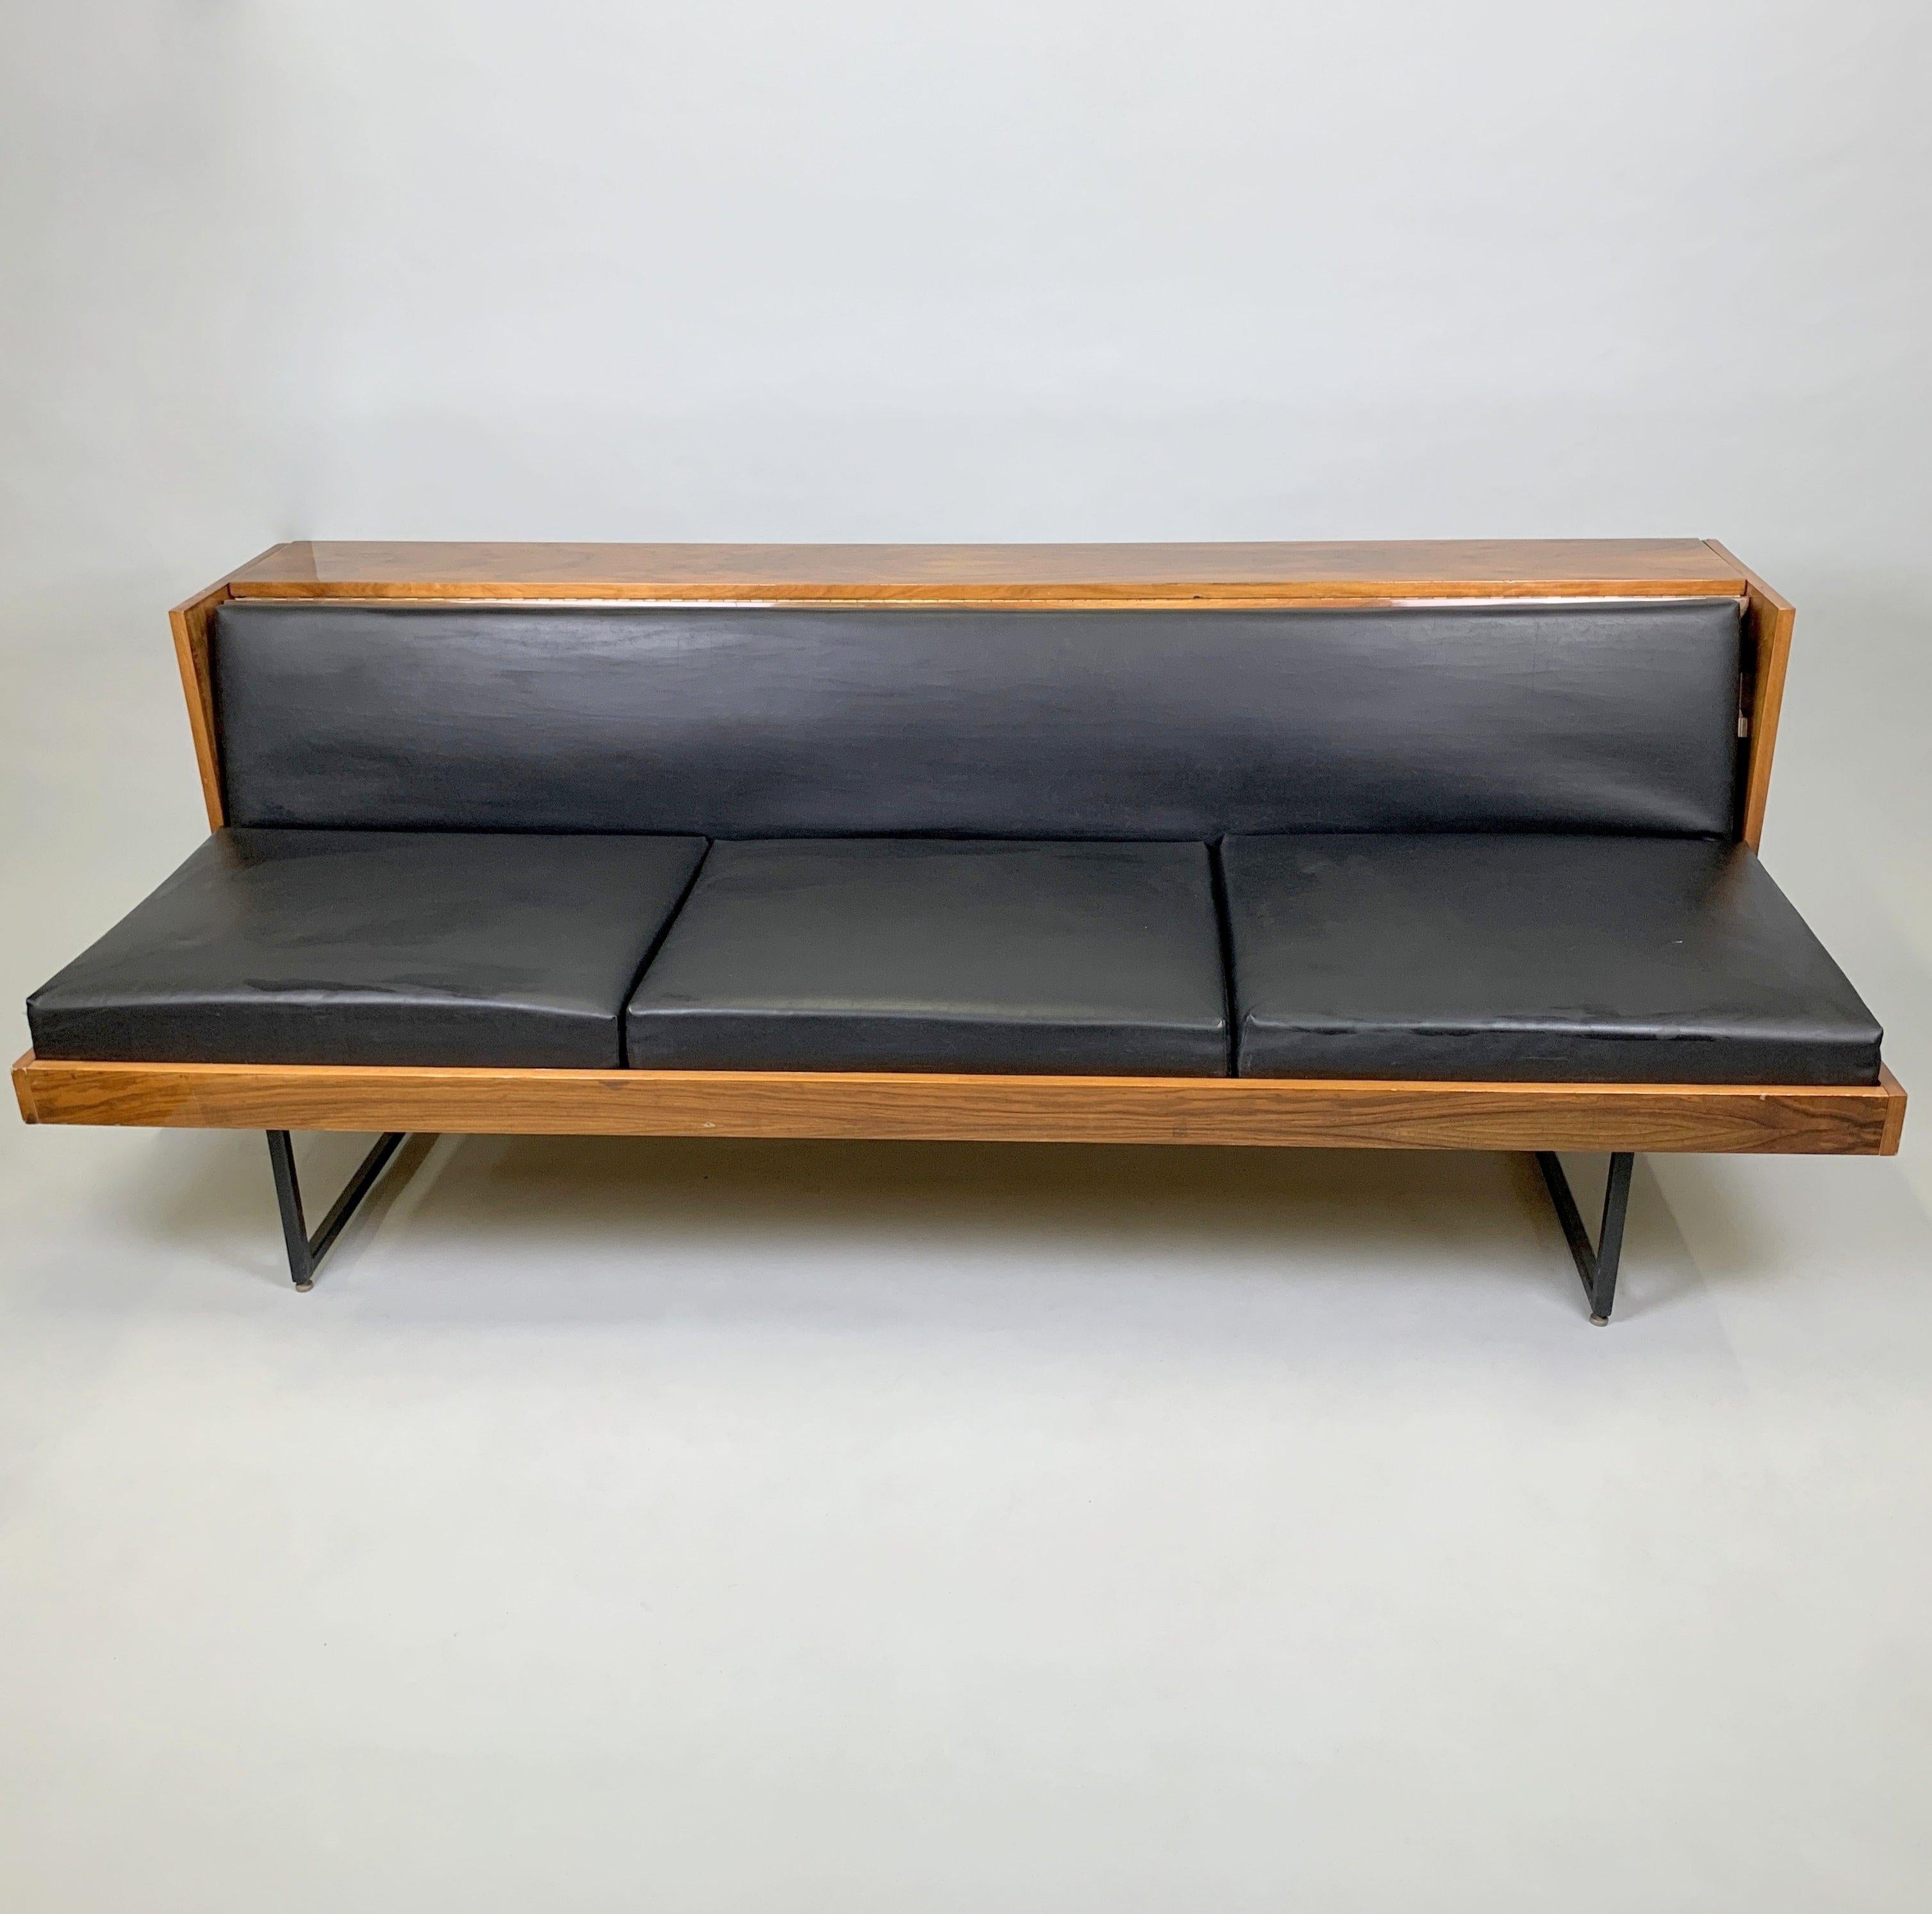 Vintage adjustable sofa made of wood, metal and leatherette. It was a part of high class furniture called 'Belmondo', made in Czechoslovakia by Novy Domov in Spiska Nova Ves (marked). In a good vintage with some signs of use (see photo).